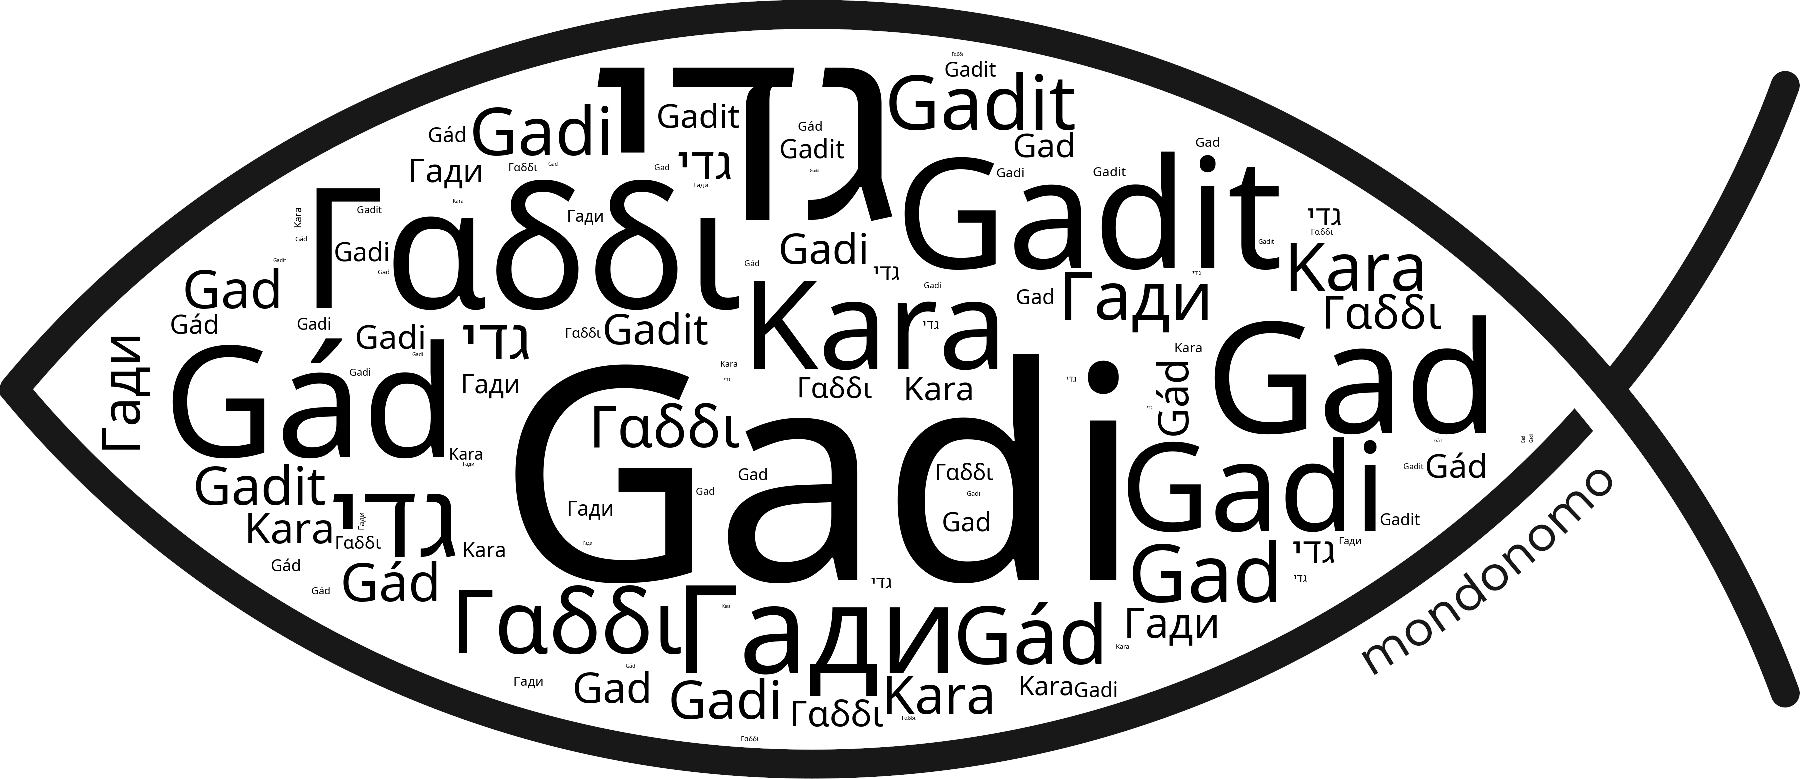 Name Gadi in the world's Bibles